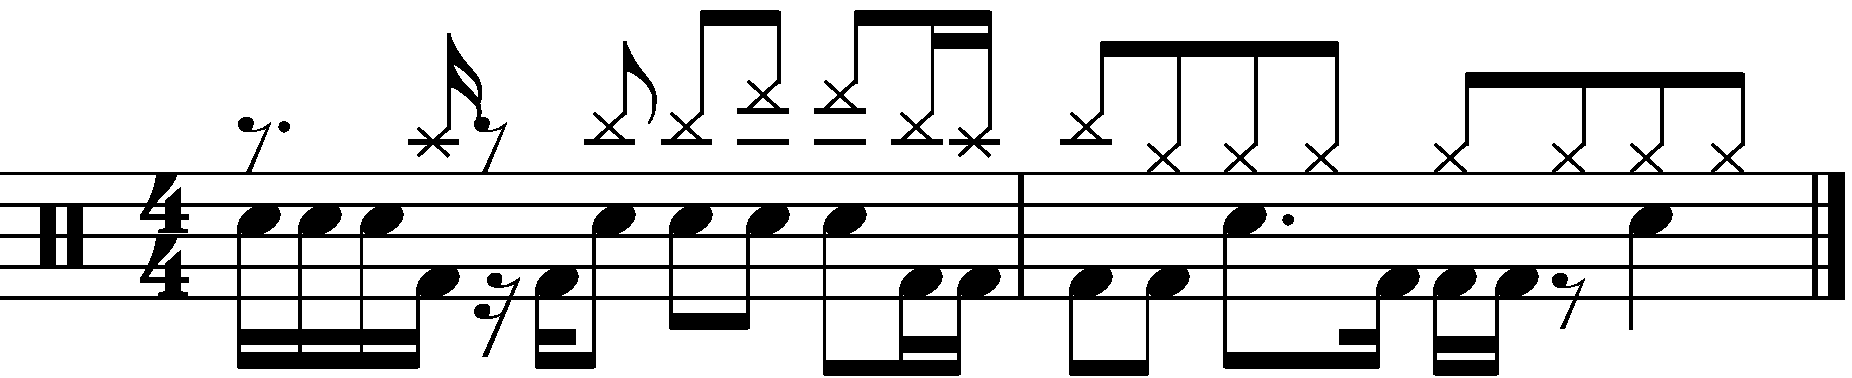 The concept applied to a rhythm based fill